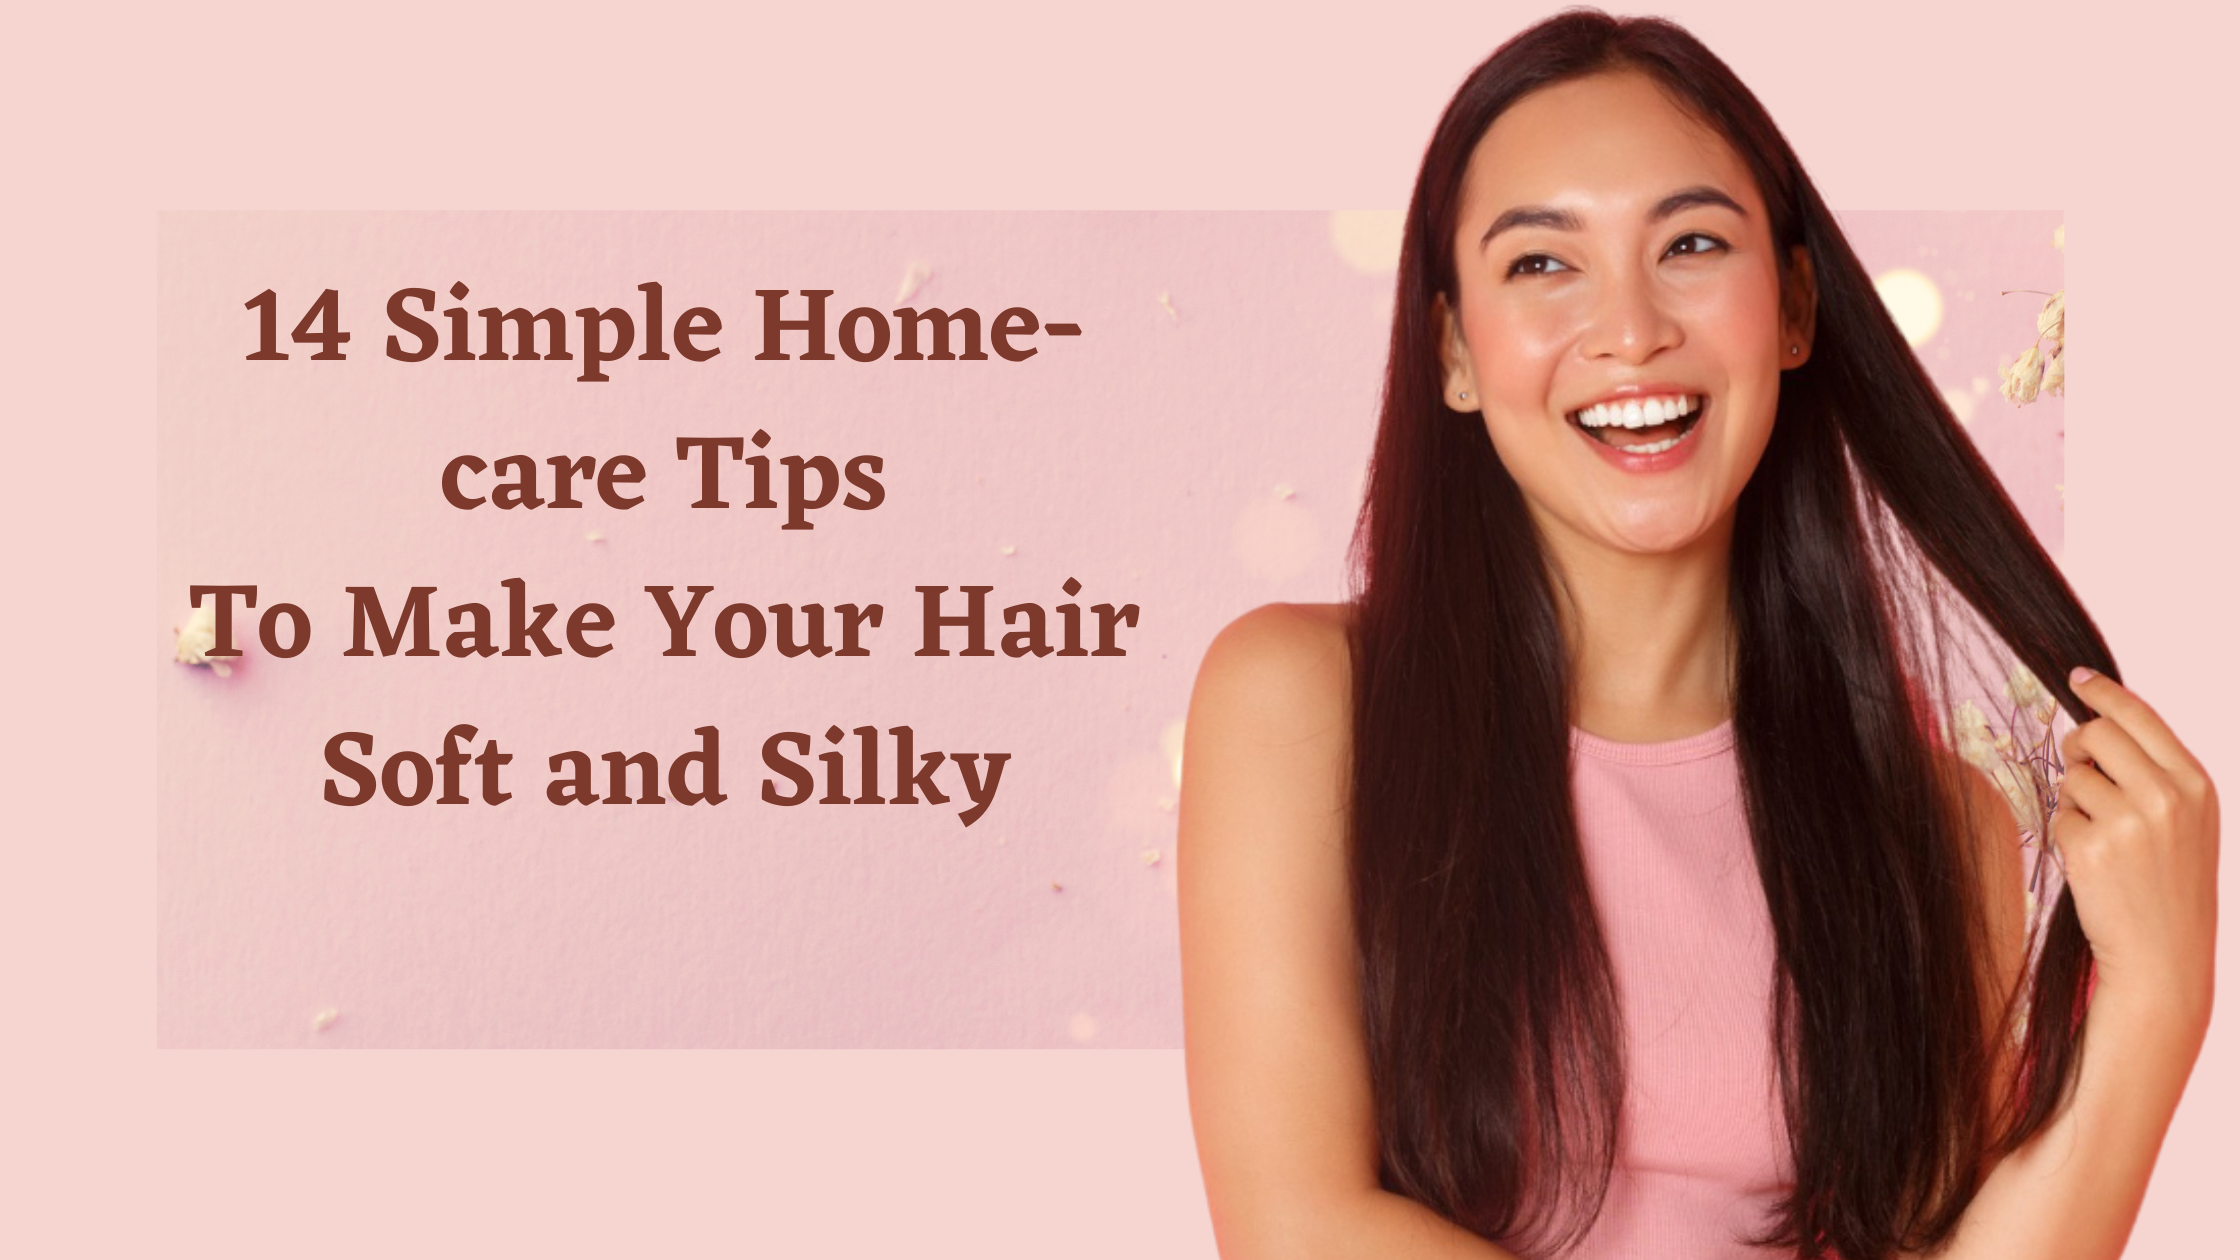 14 Simple Home-care Tips To Make Your Hair Soft and Silky